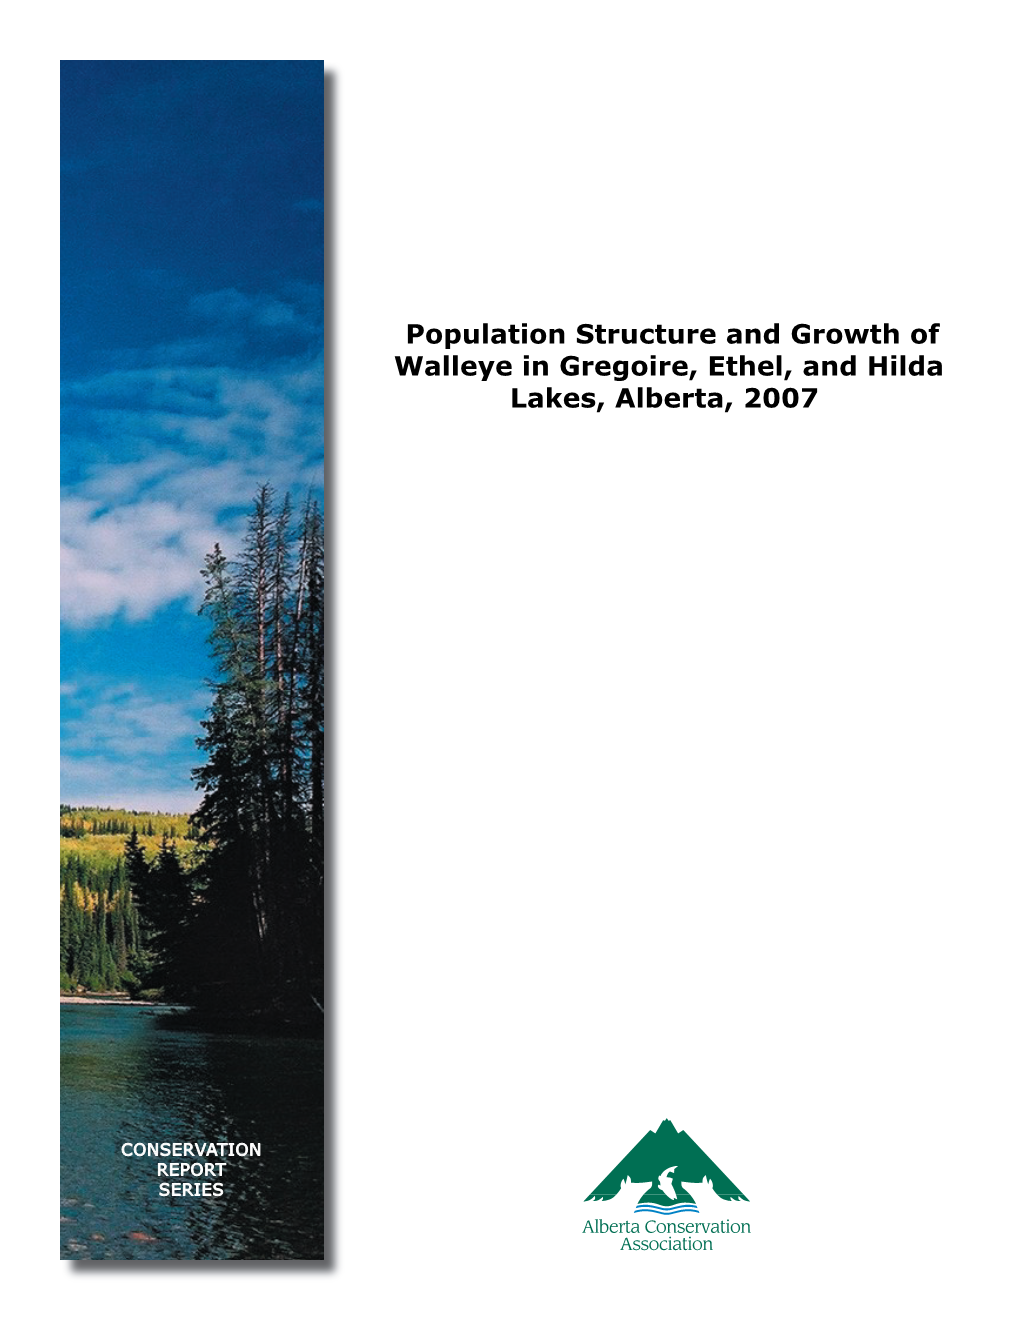 Population Structure and Growth of Walleye in Gregoire, Ethel, and Hilda Lakes, Alberta, 2007